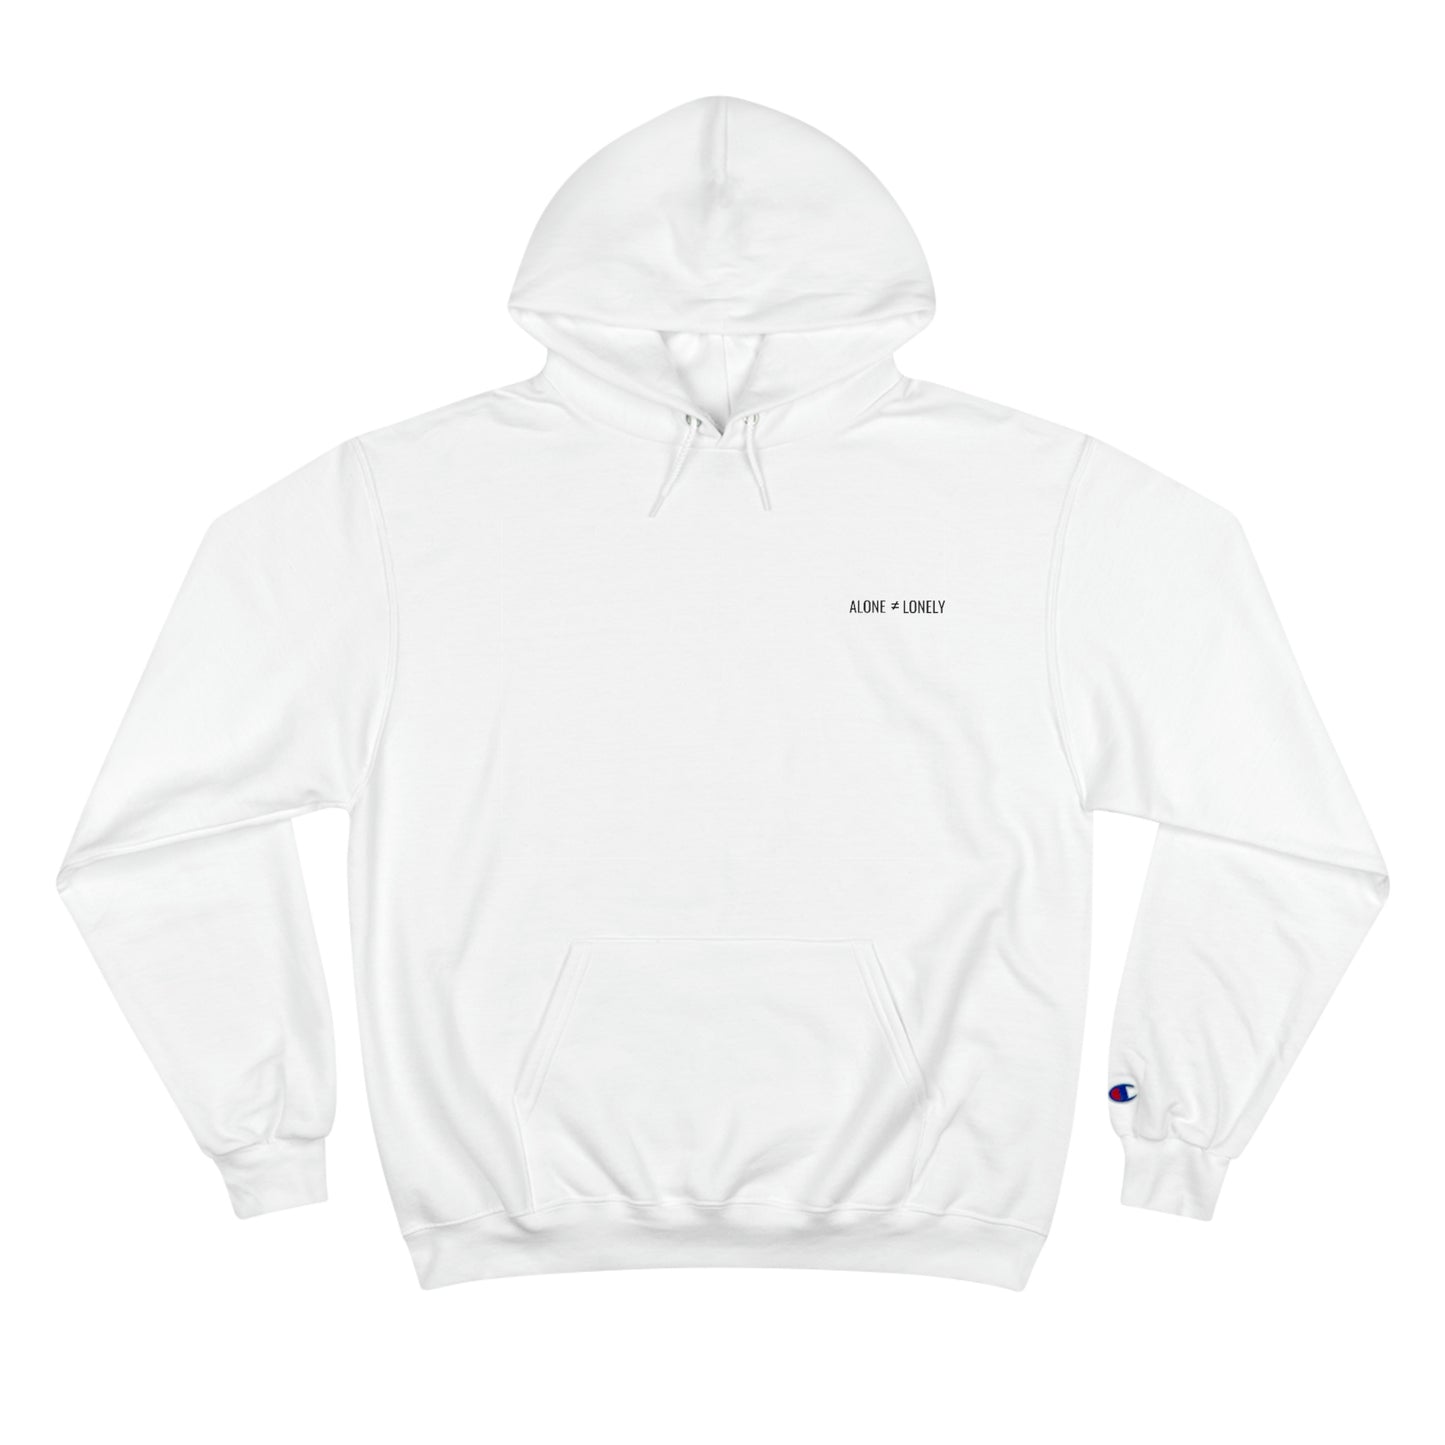 Alone ≠ Lonely Champion Hoodie